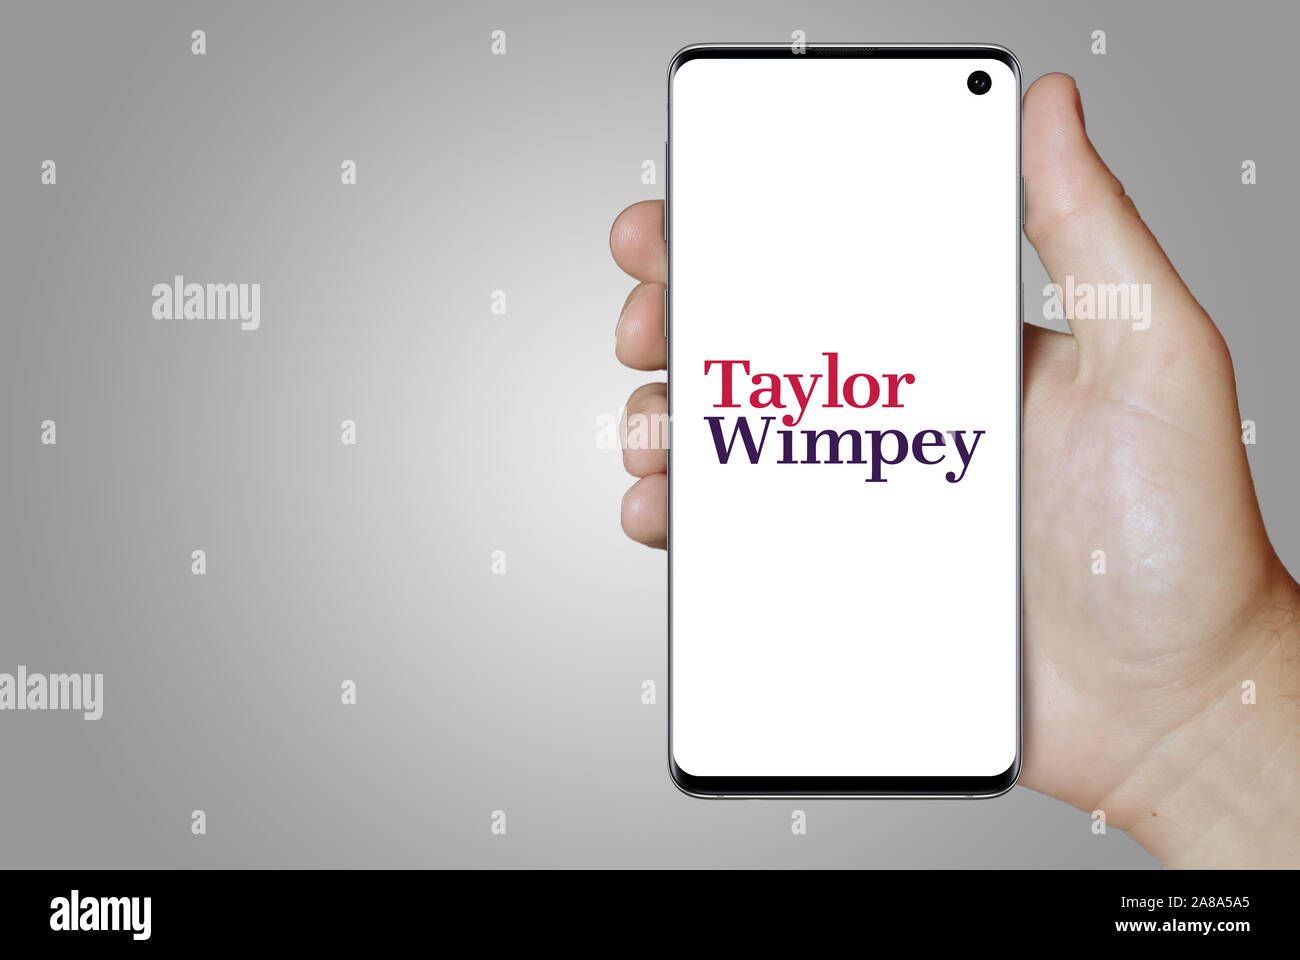 Logo of public company Taylor Wimpey displayed on a smartphone. Grey background. Credit: PIXDUCE Stock Photo